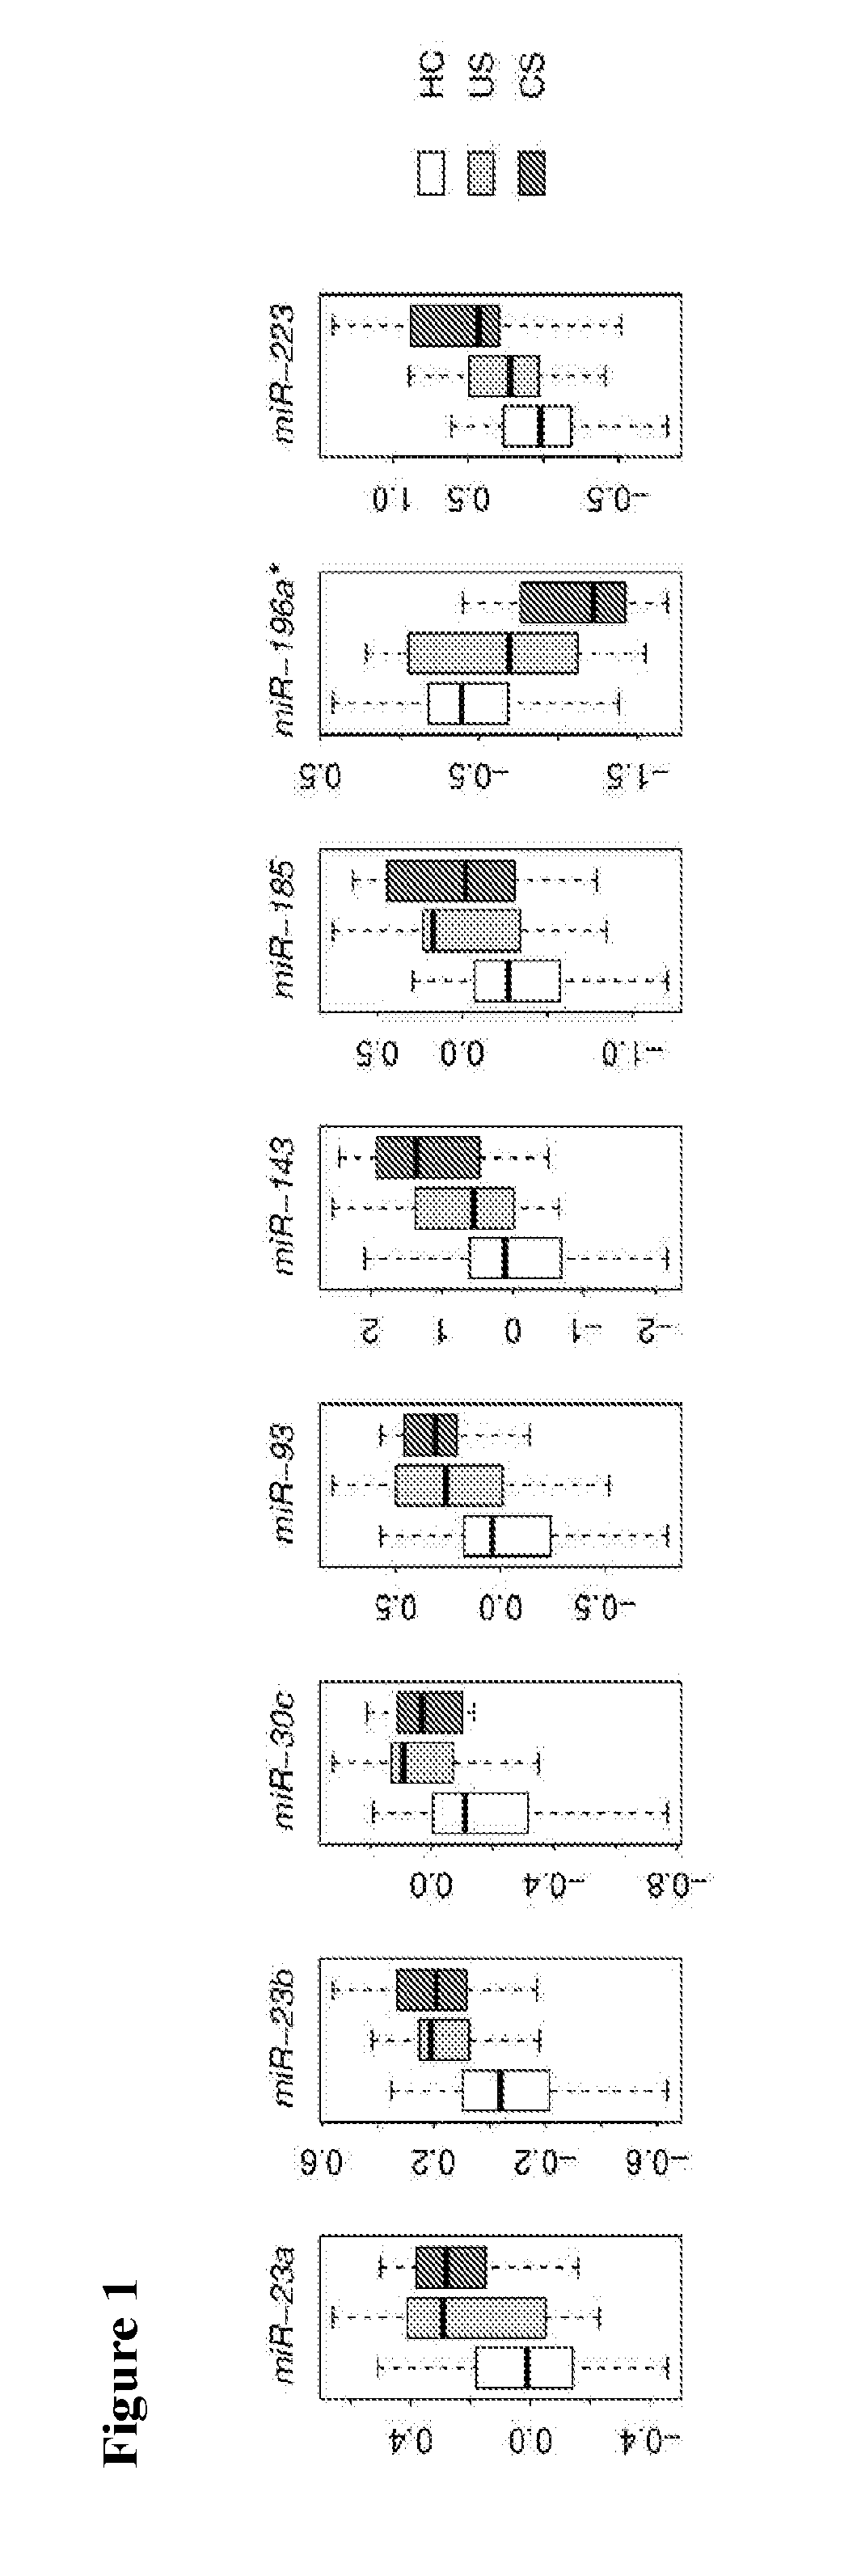 Systems and methods for characterizing granulomatous diseases